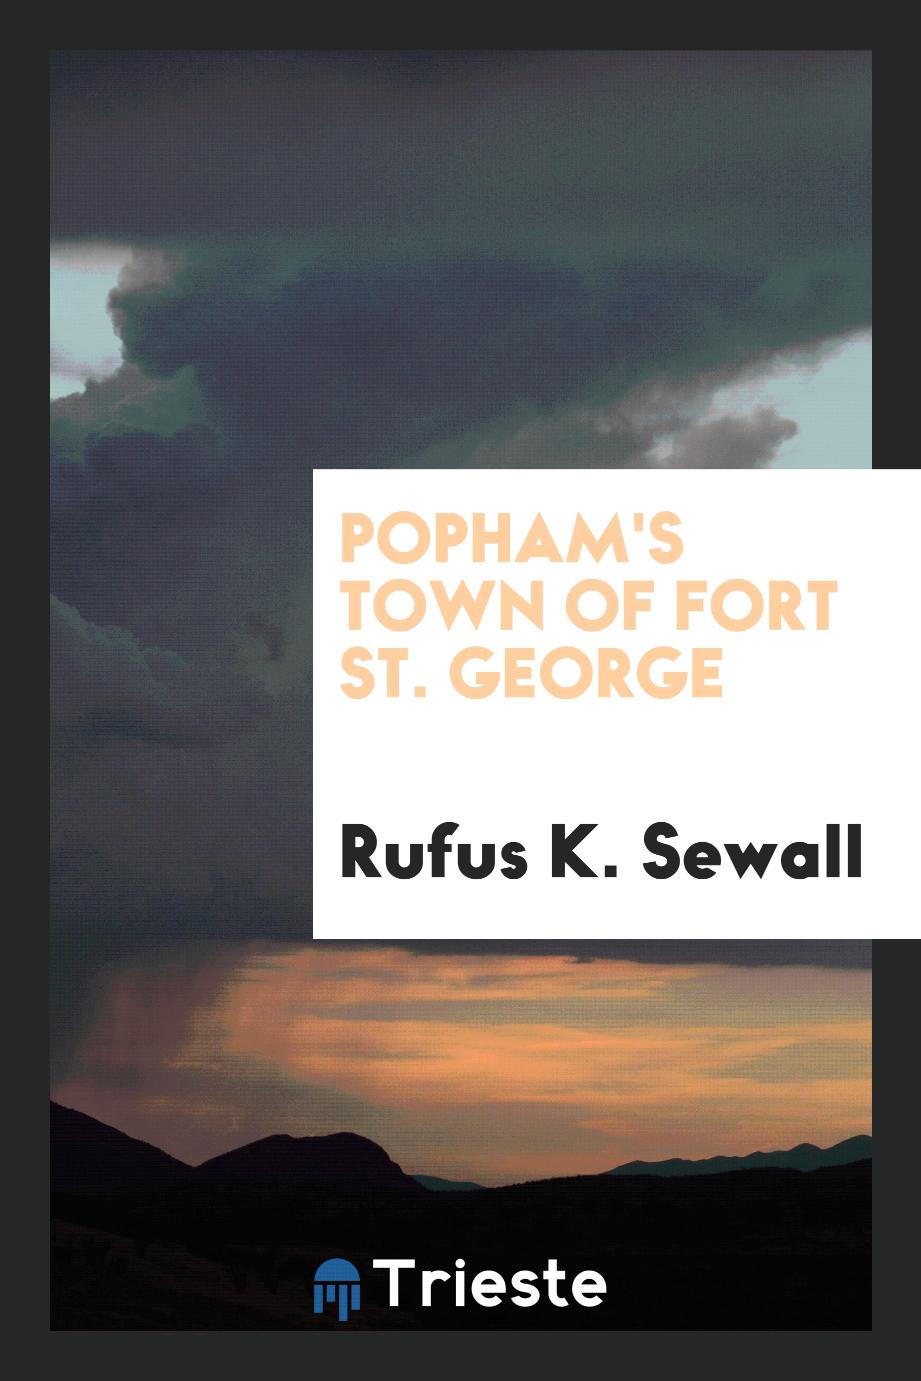 Popham's Town of Fort St. George